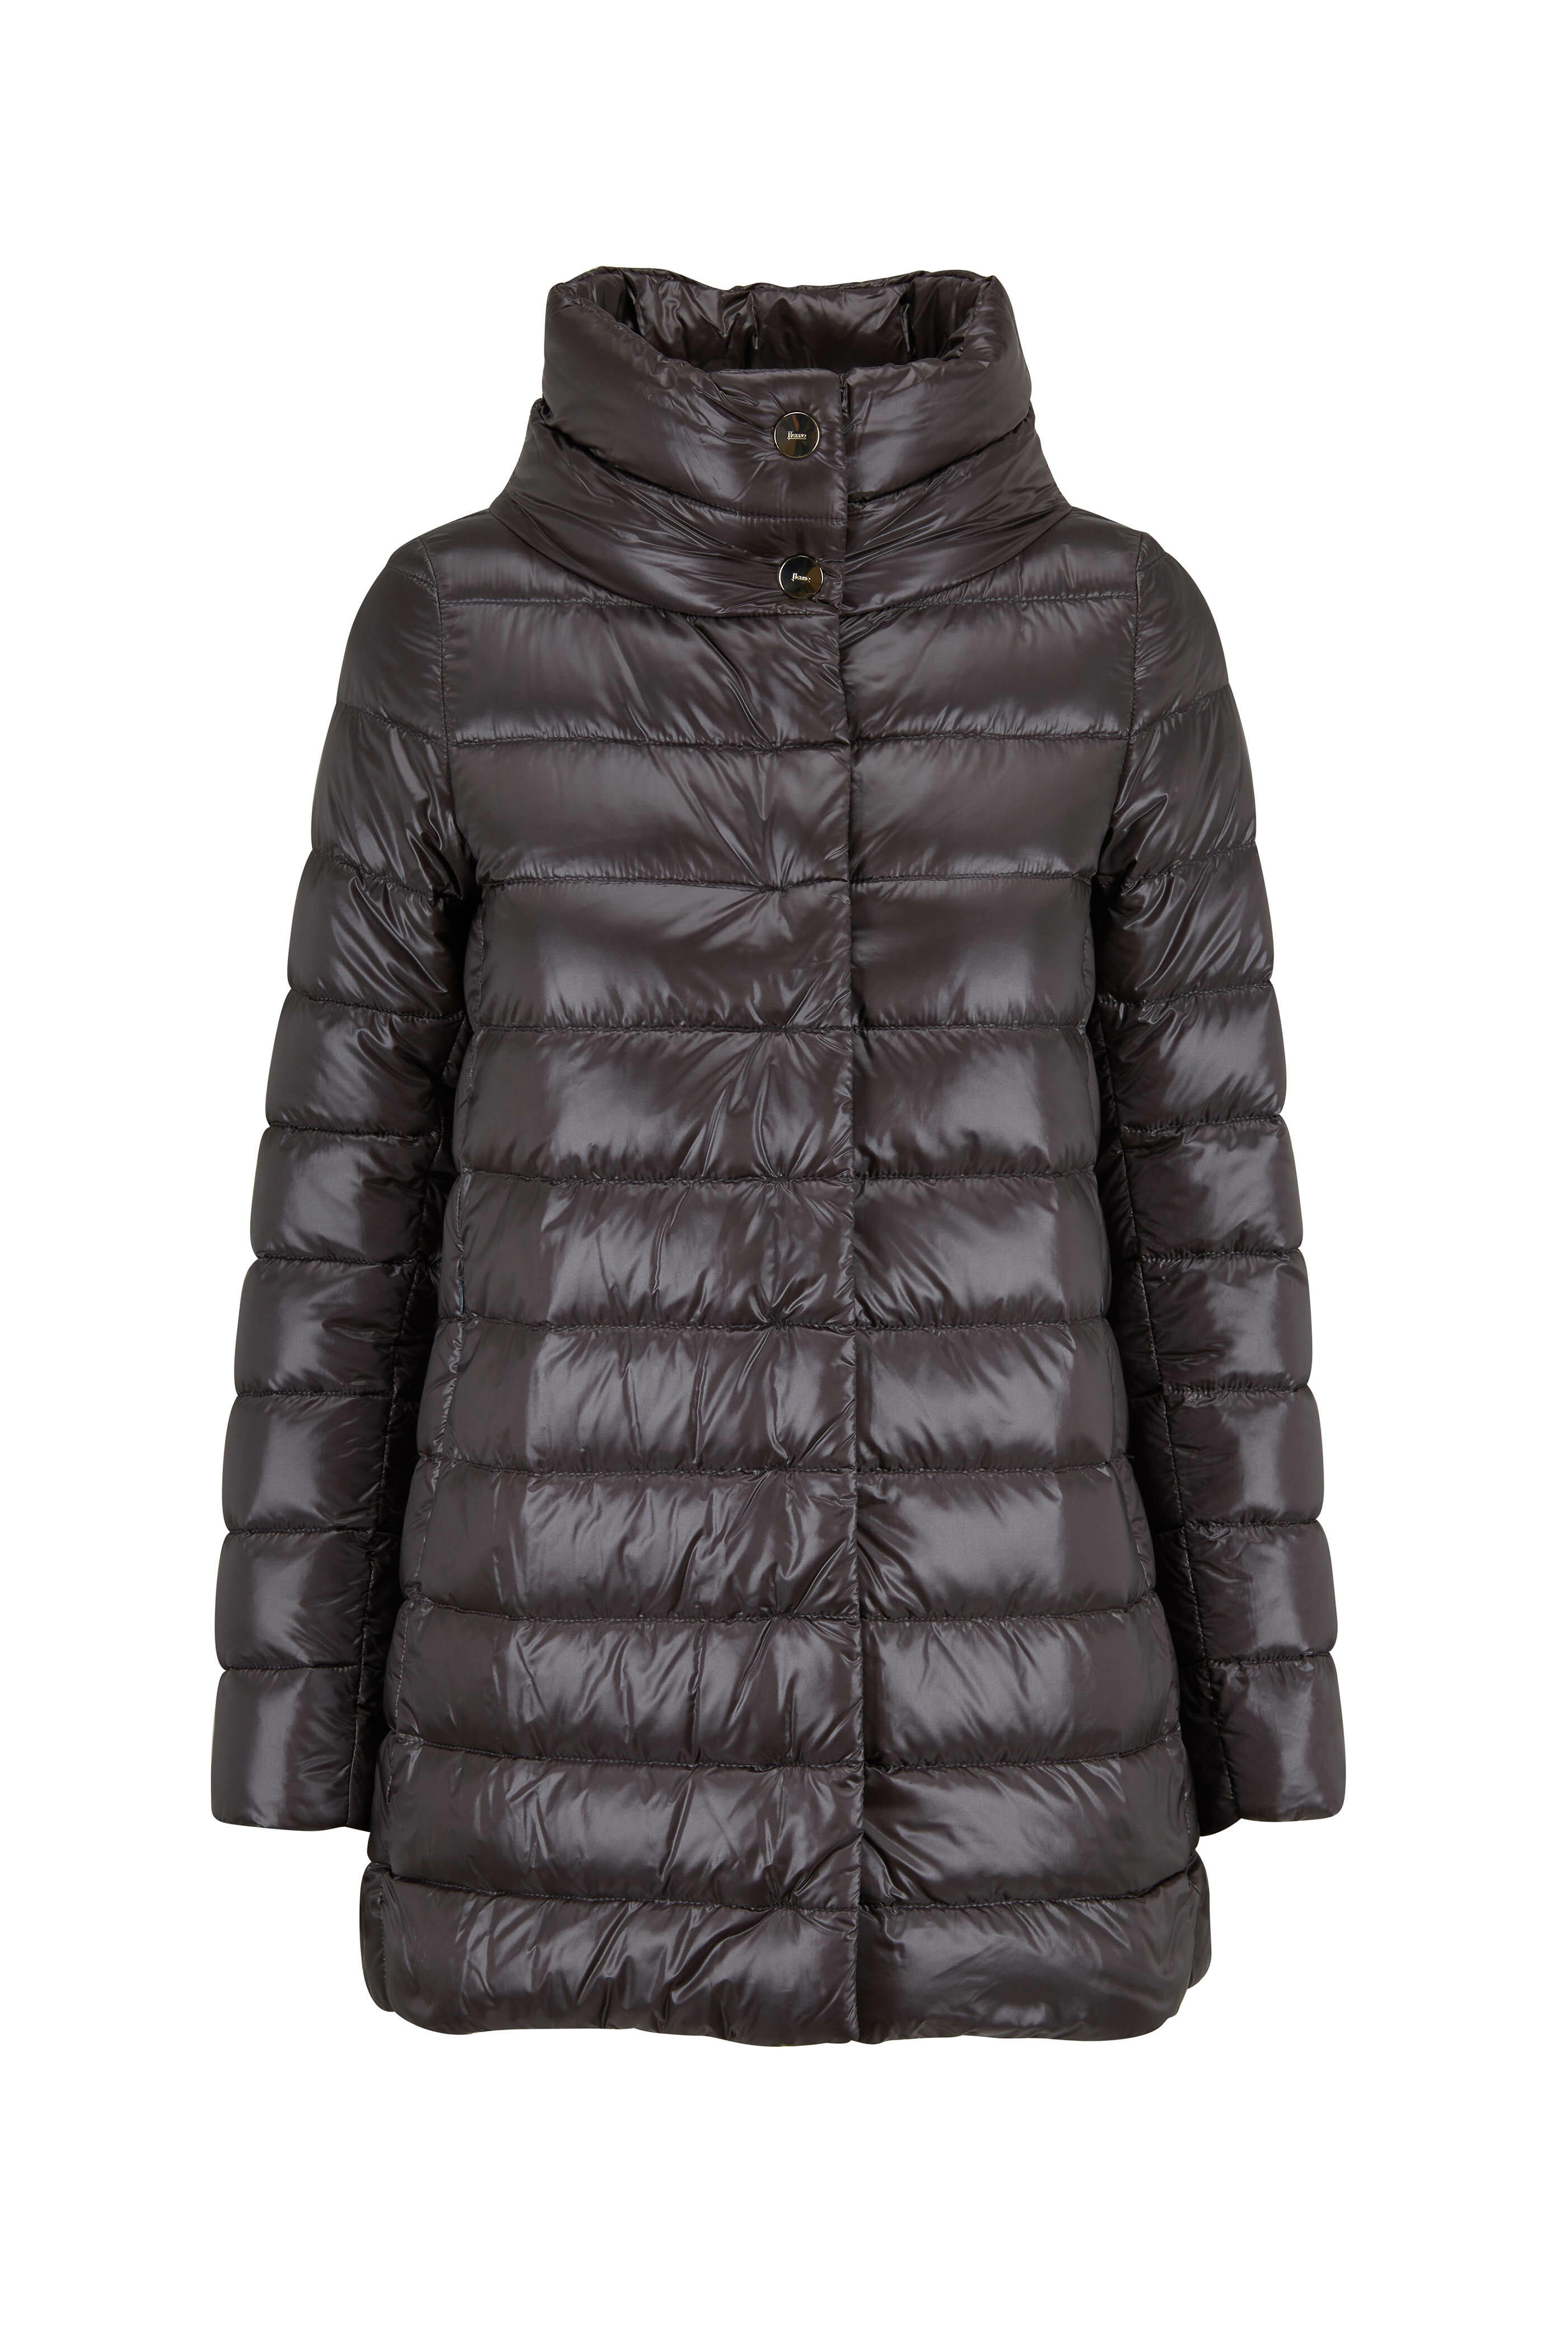 Herno - Charcoal Hi-Low Puffer Jacket | Mitchell Stores